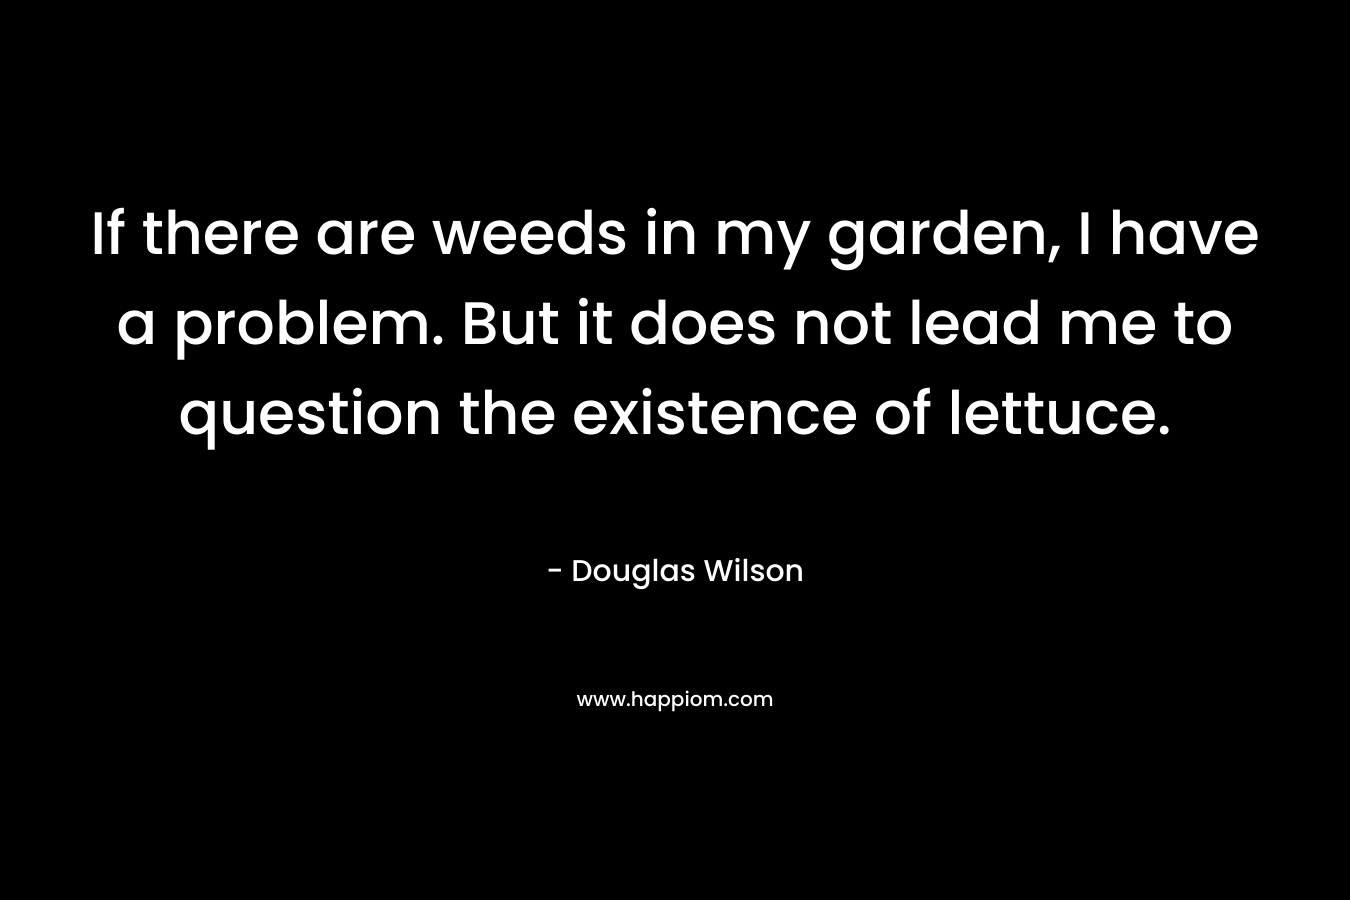 If there are weeds in my garden, I have a problem. But it does not lead me to question the existence of lettuce. – Douglas Wilson